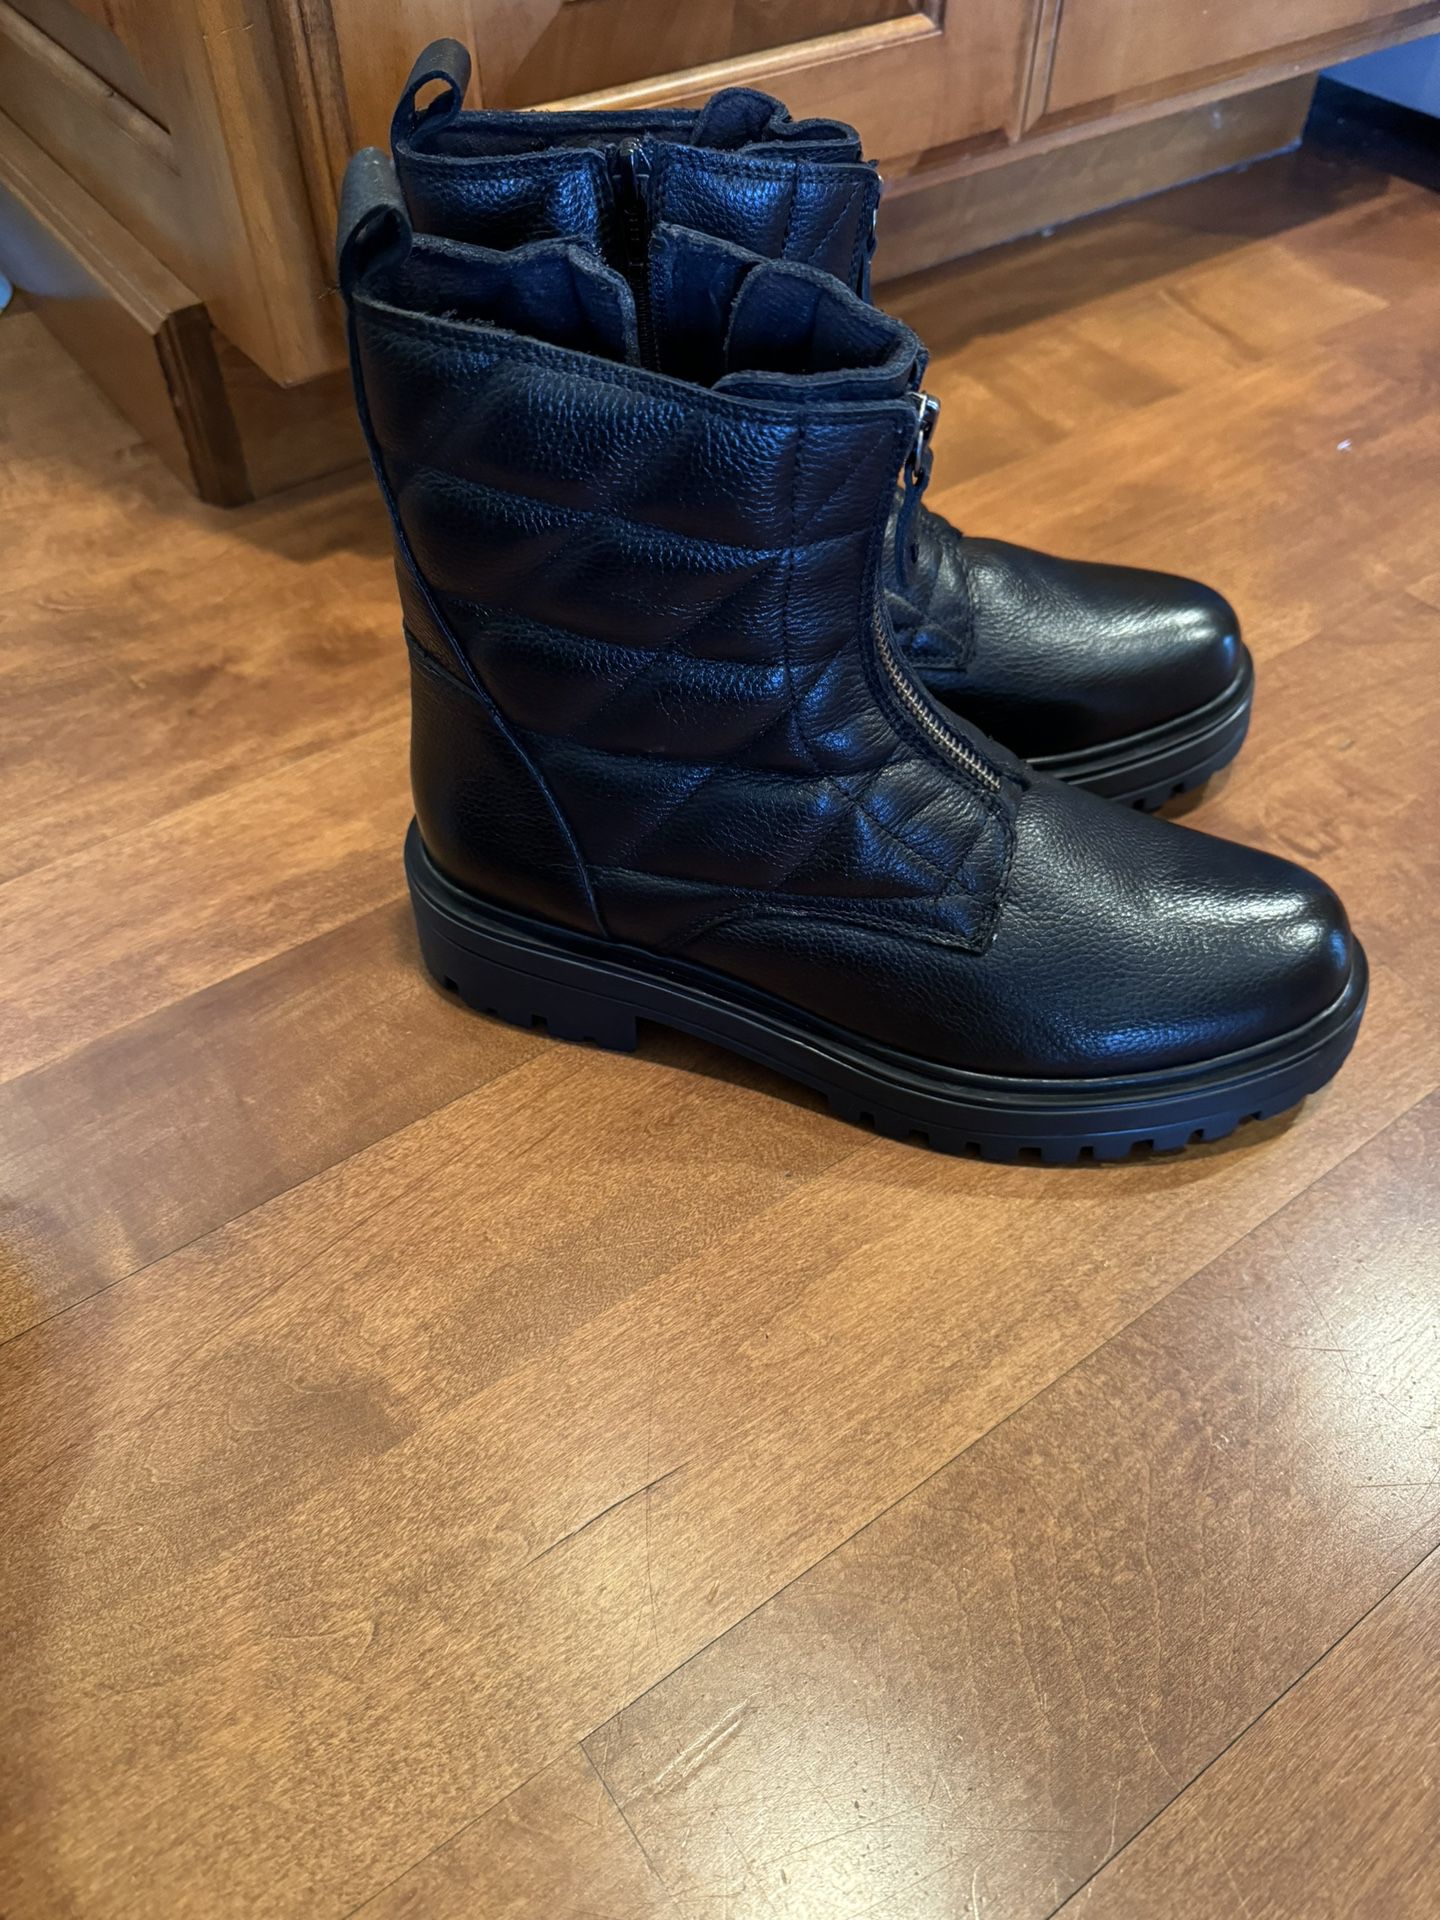 Woman’s New Alberto Torresi Leather Boots Shipping Available 